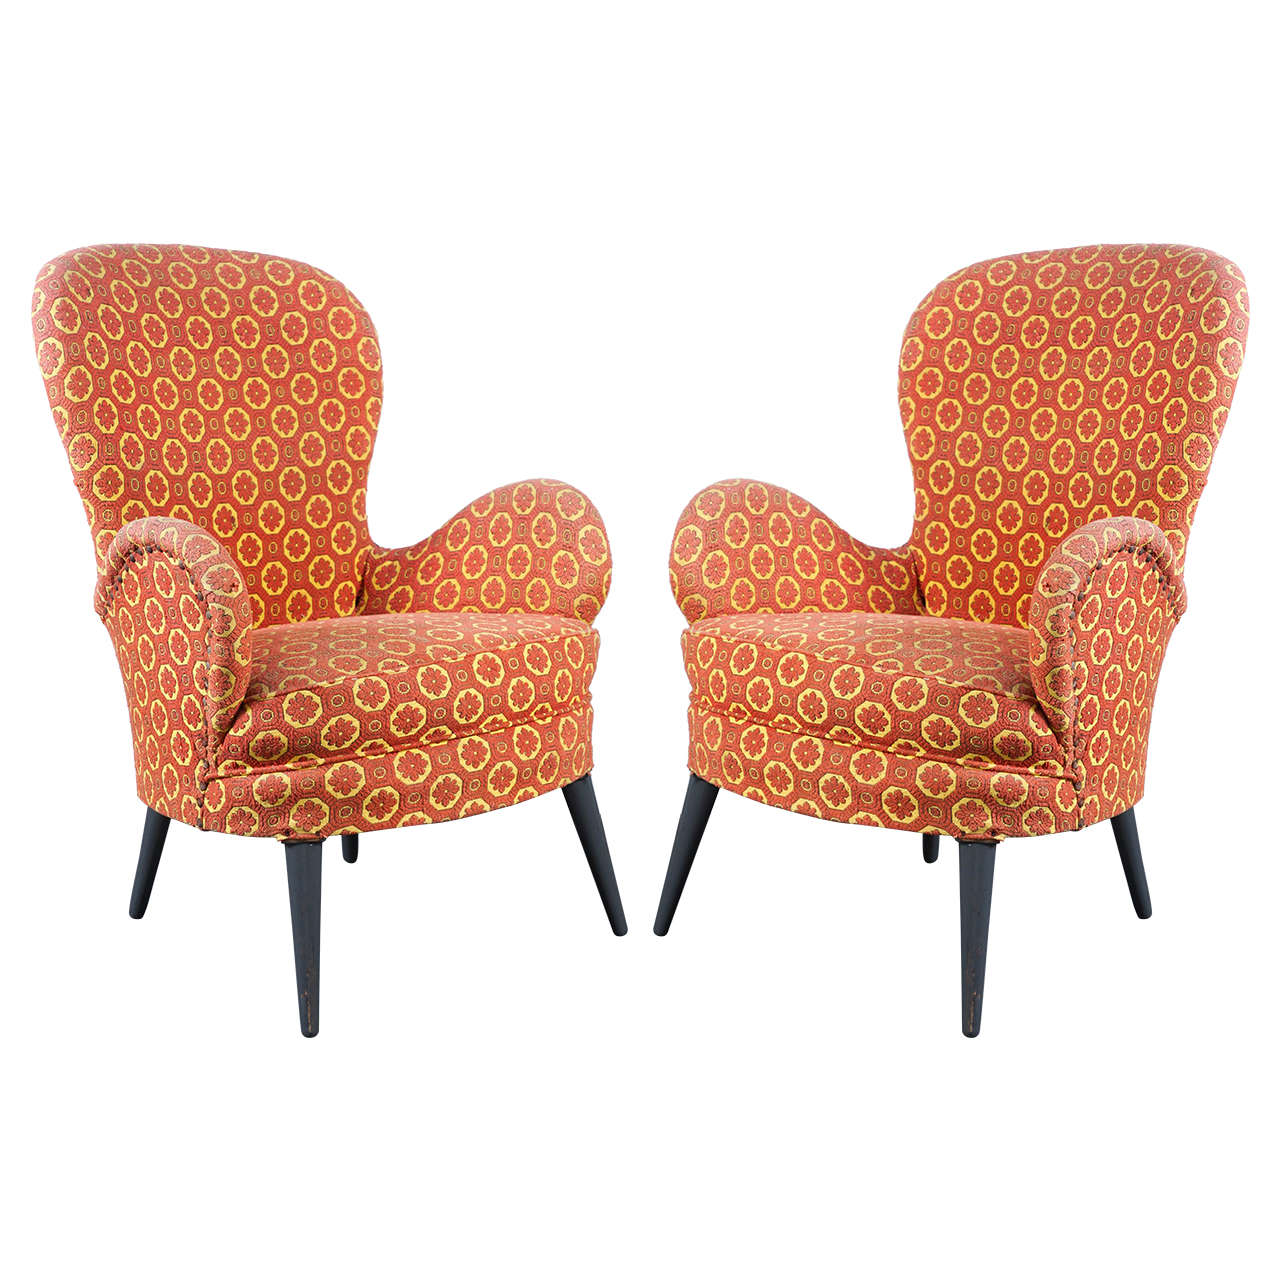 Pair of Chairs of Graphic Modern Proportions